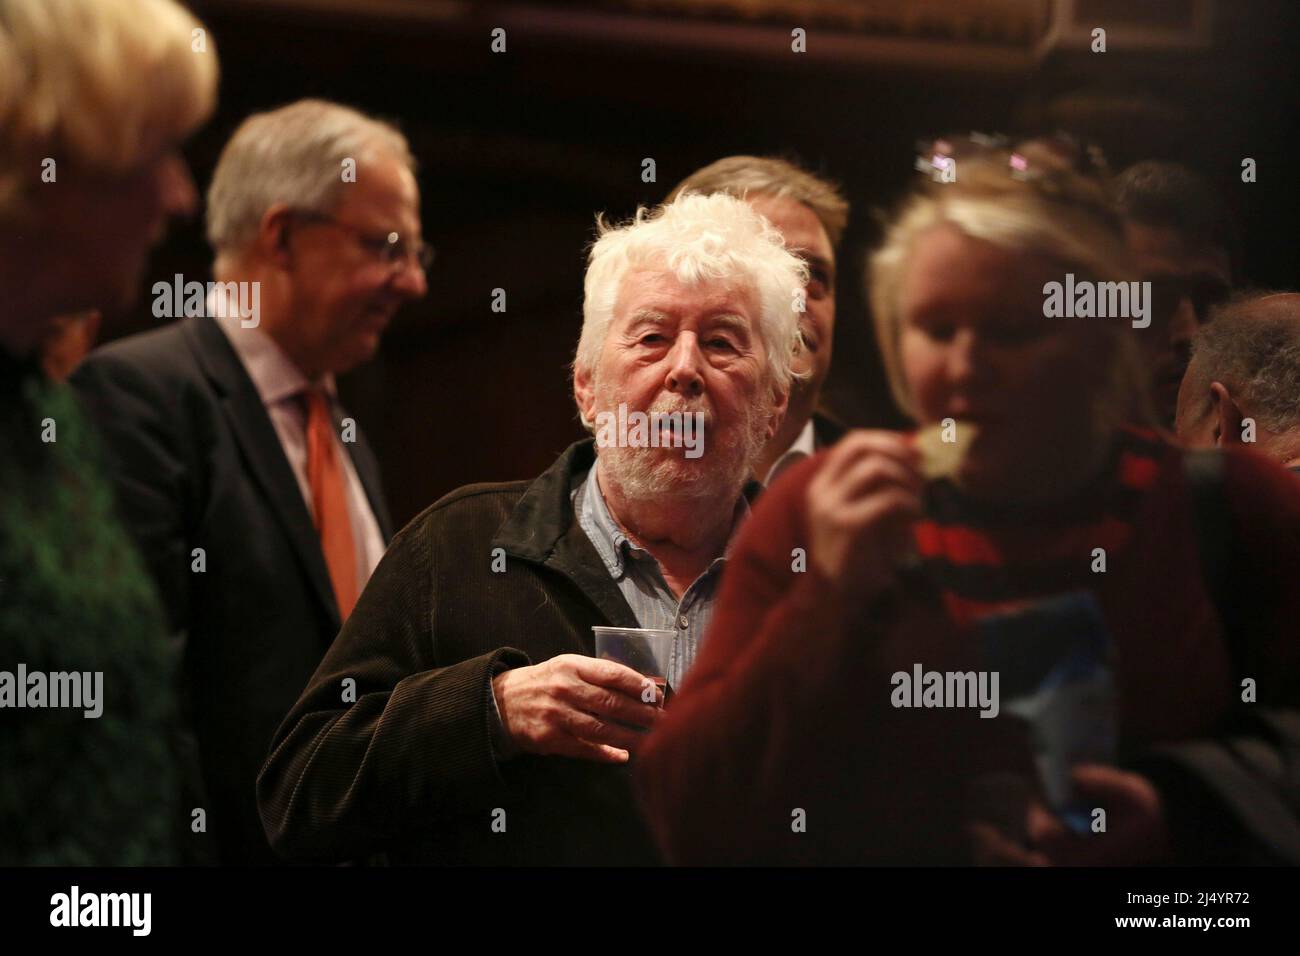 Sir Harrison Birtwistle photographed during the interval of the final dress rehearsal of THE MASK OF ORPHEUS at English National Opera (ENO), London Coliseum on 16 October 2019 Stock Photo